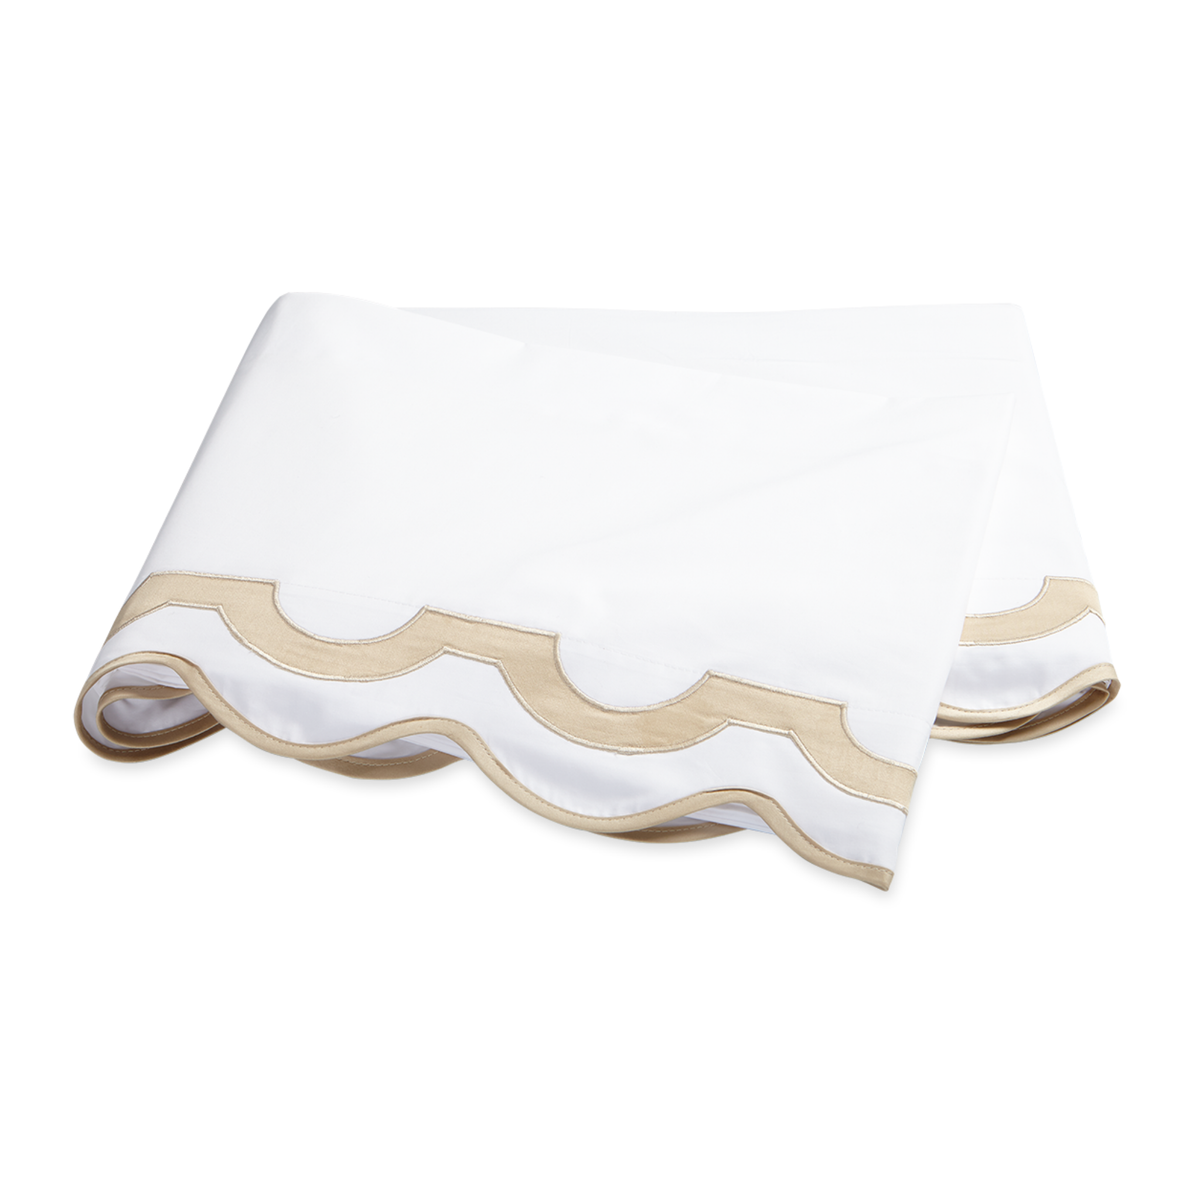 Folded Flat Sheet of Matouk Mirasol Collection in Champagne Color